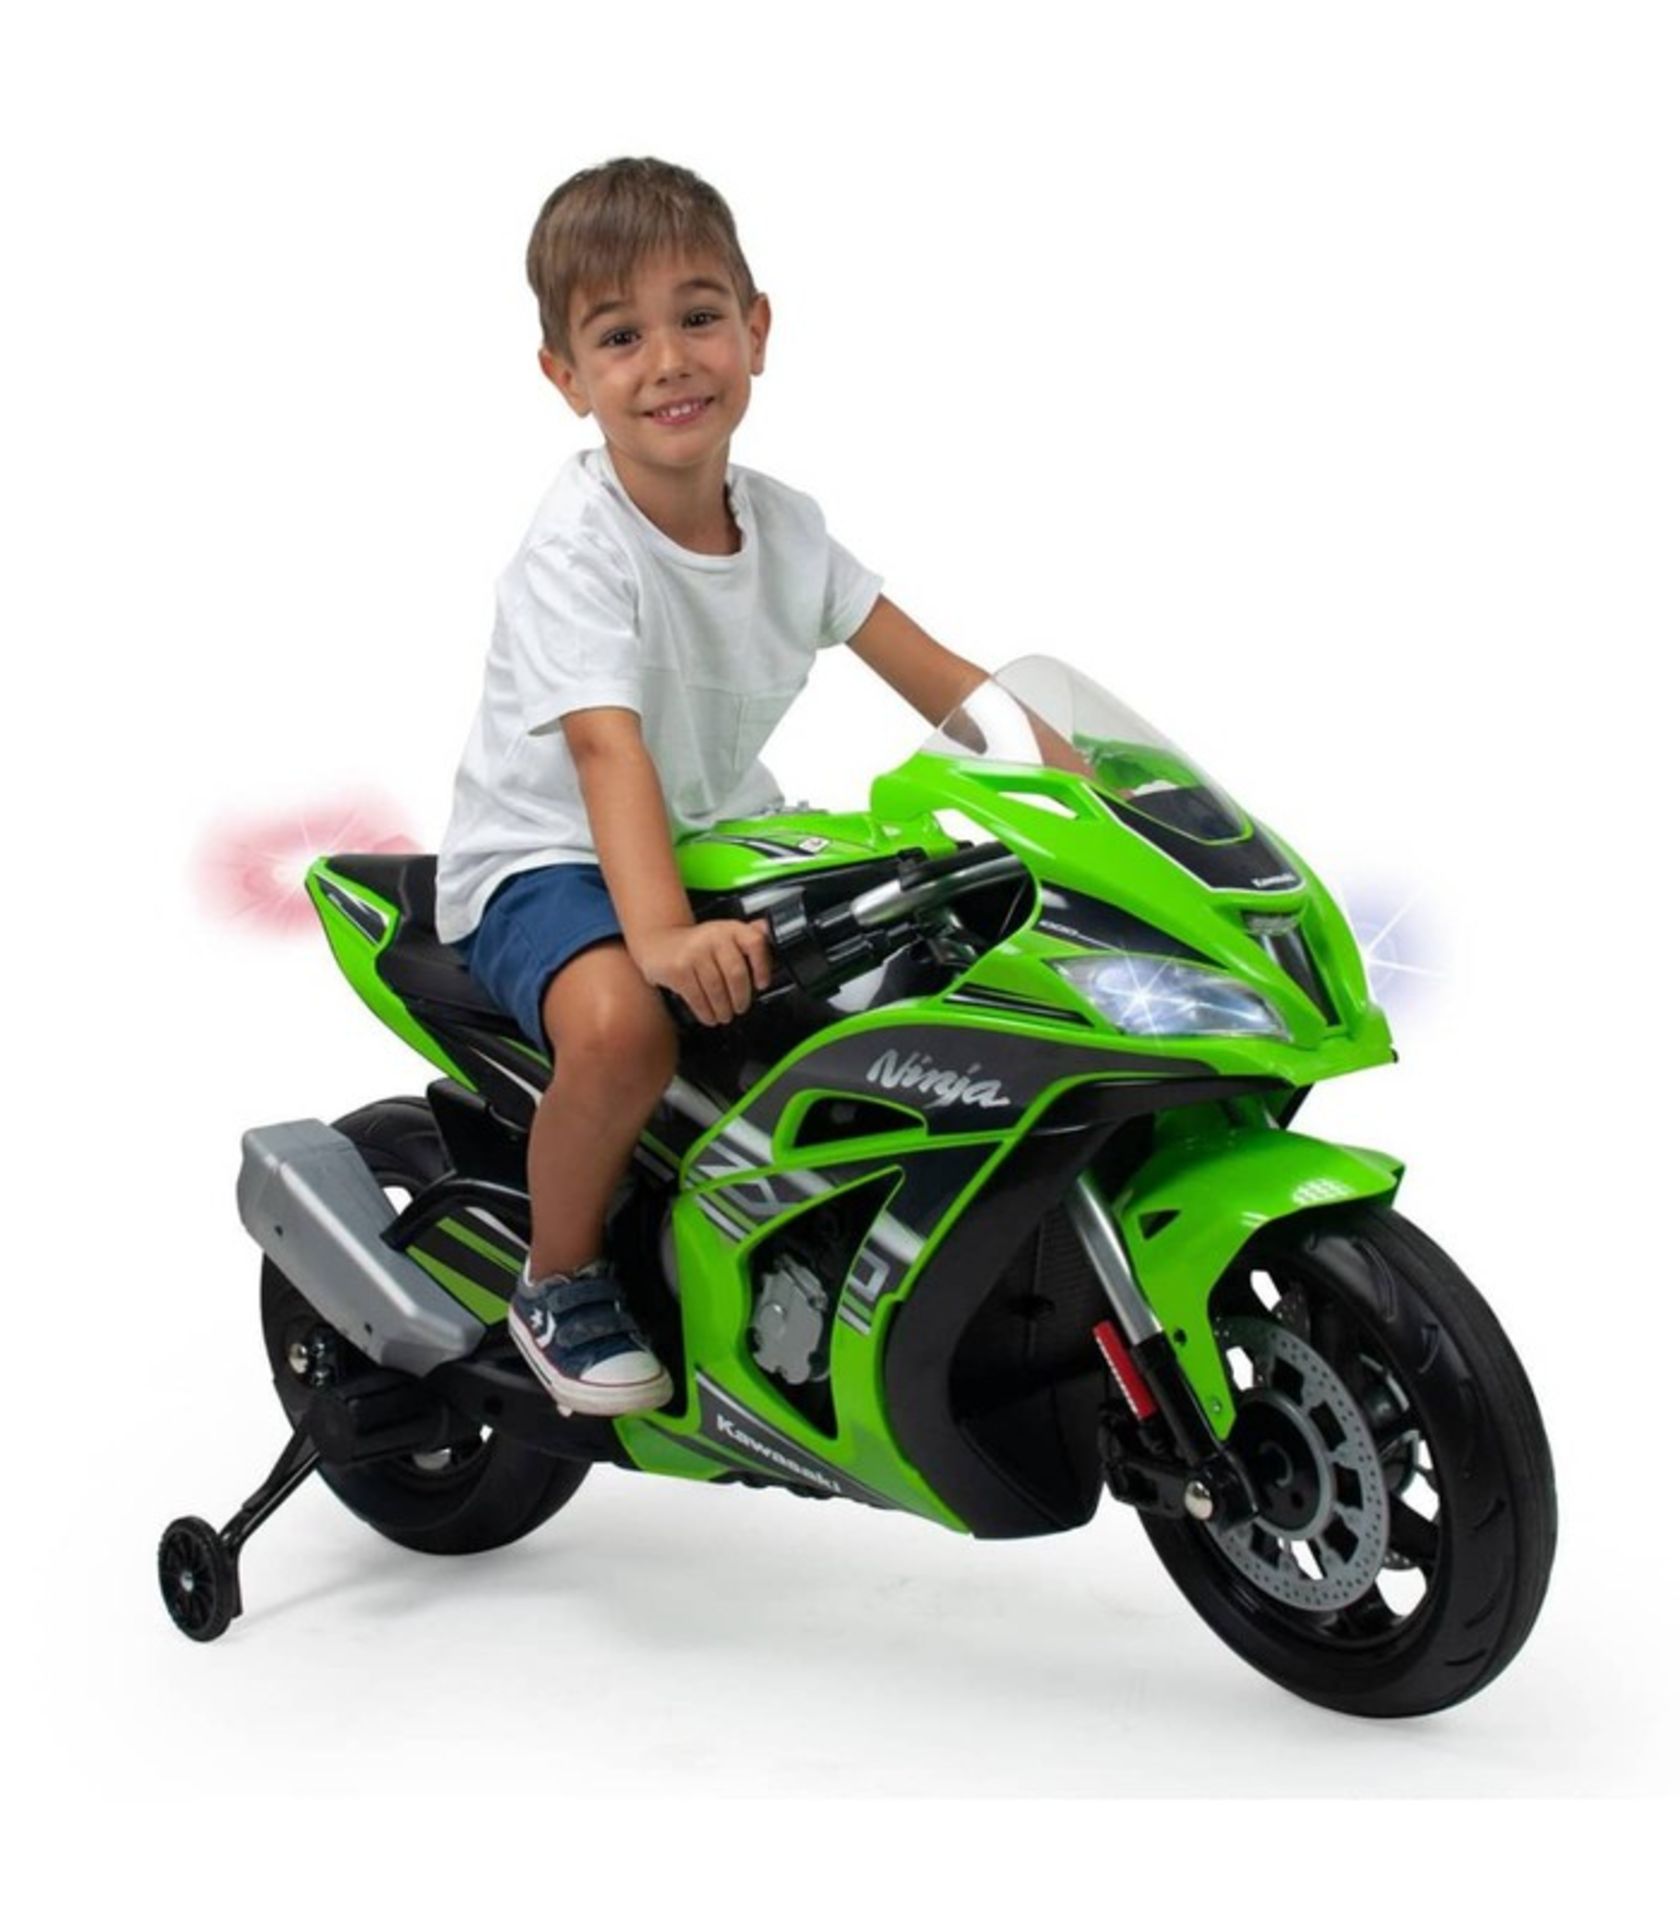 1 x Injusa Kids Electric Ride On Kawasaki ZX10 12V Motorcycle - 6495 - HTYS174 - CL987 - Location: - Image 18 of 24